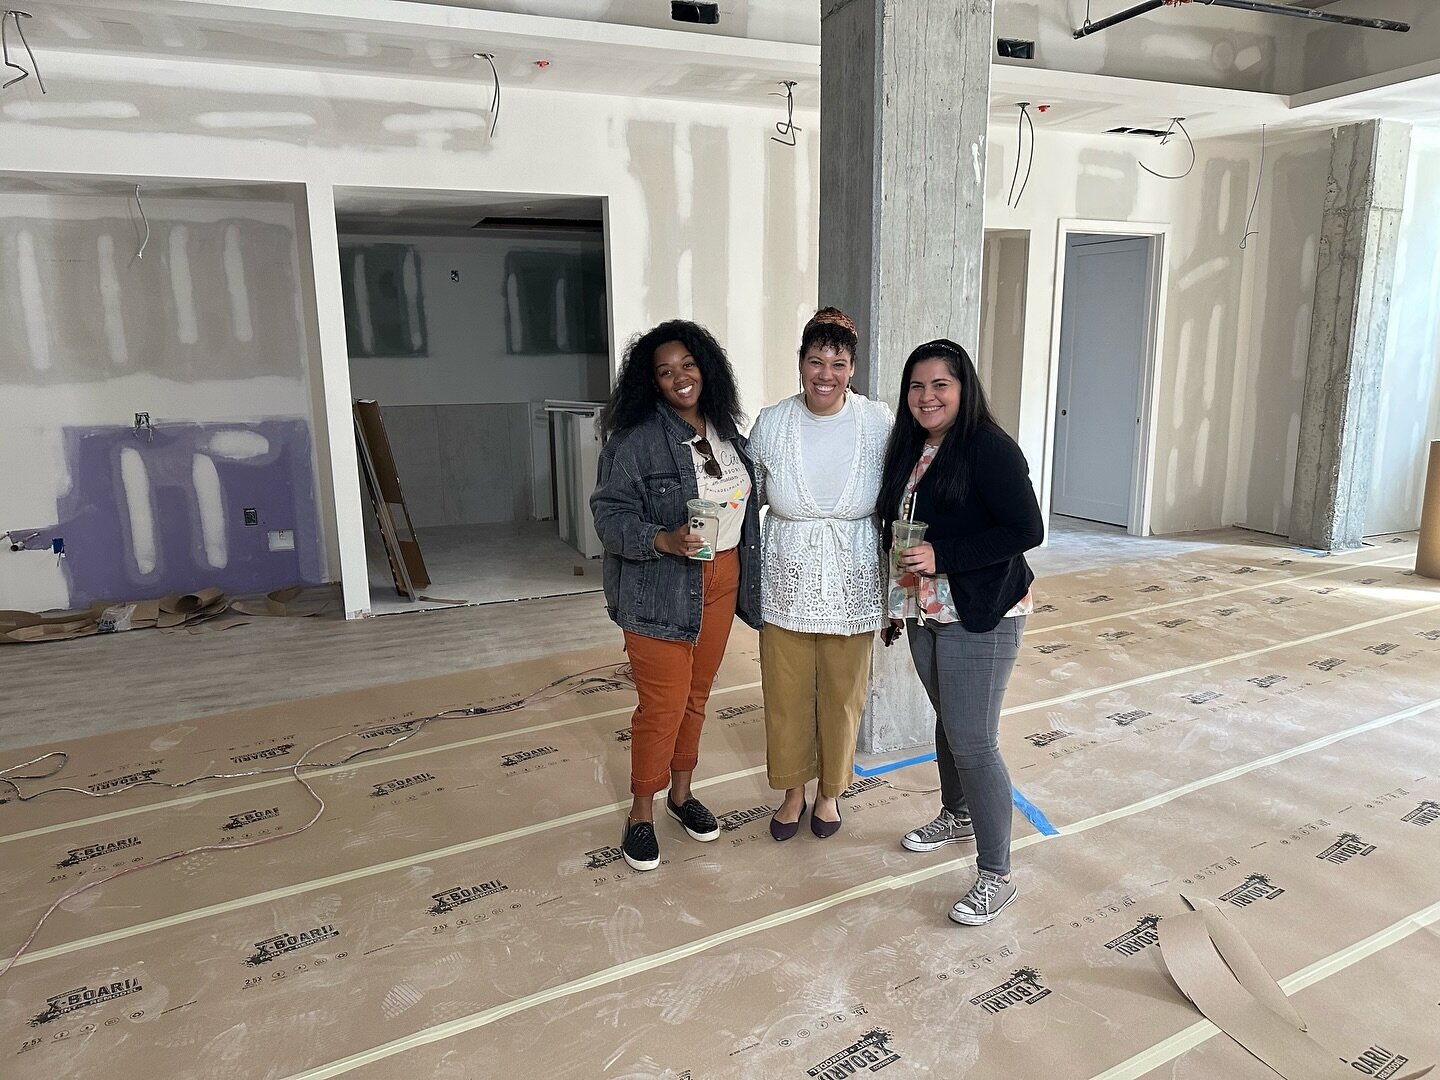 Ms. Devon, Ms. Morgen and Ms. Camila check out the new space in Northern Liberties 😍